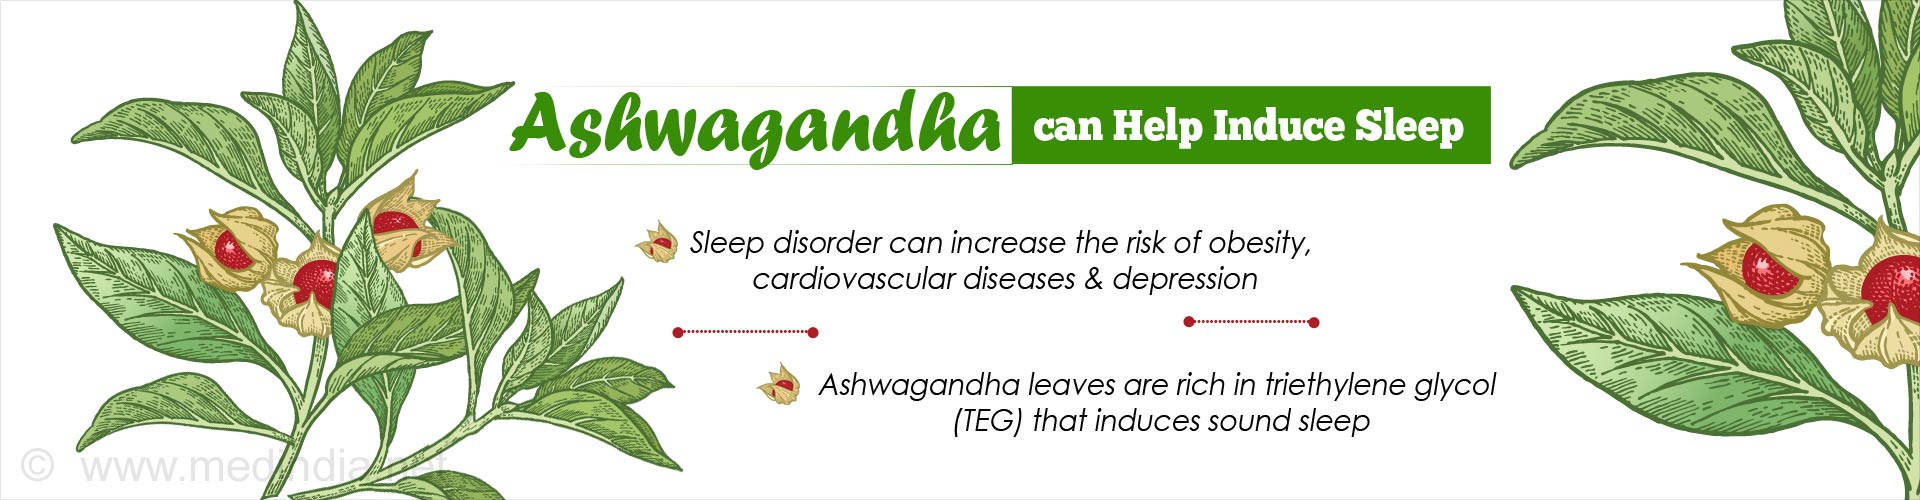 Ashwagandha Can Help Induce Sleep
- Sleep disorder can increase the risk of obesity, cardiovascular diseases & depression
- Ashwagandha leaves are rich in triethylene glycol (TEG) that induces sound sleep
